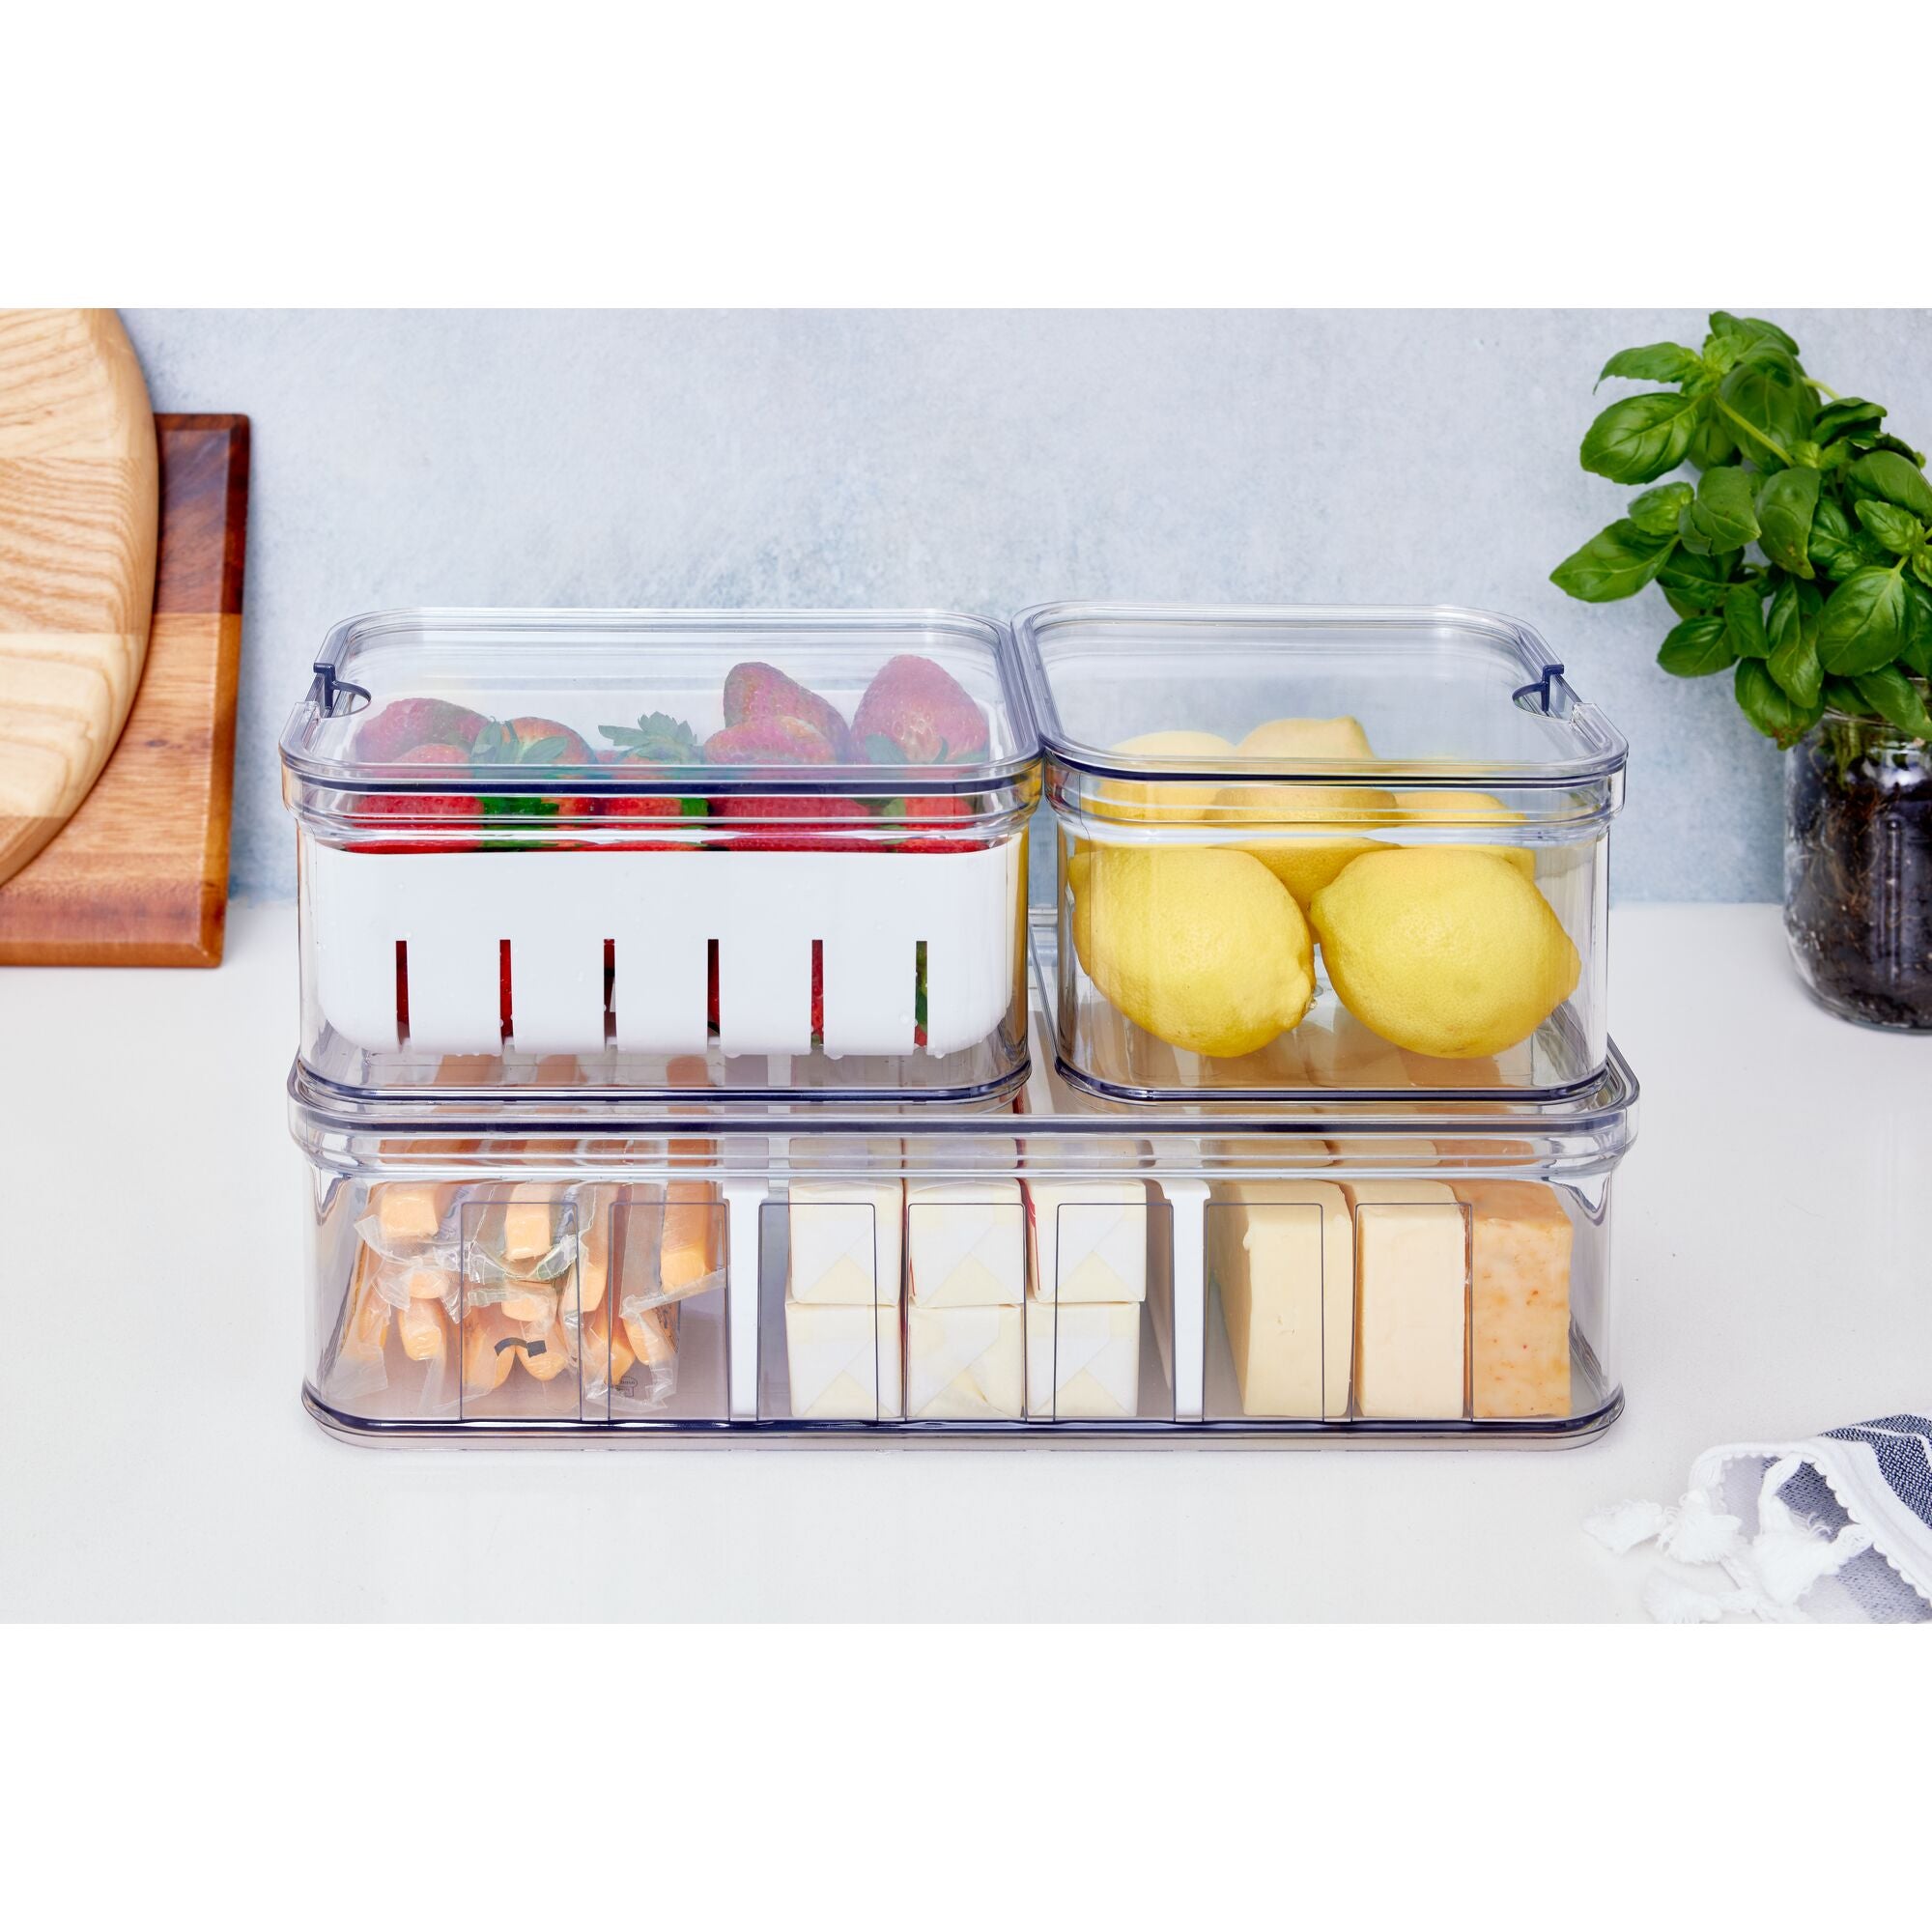  fridge bins and organizers Set of 10 - Stackable refrigerator  bins set includes 6 bins for food containers and 4 precut shelf liners for  fridge shelf's: Home & Kitchen